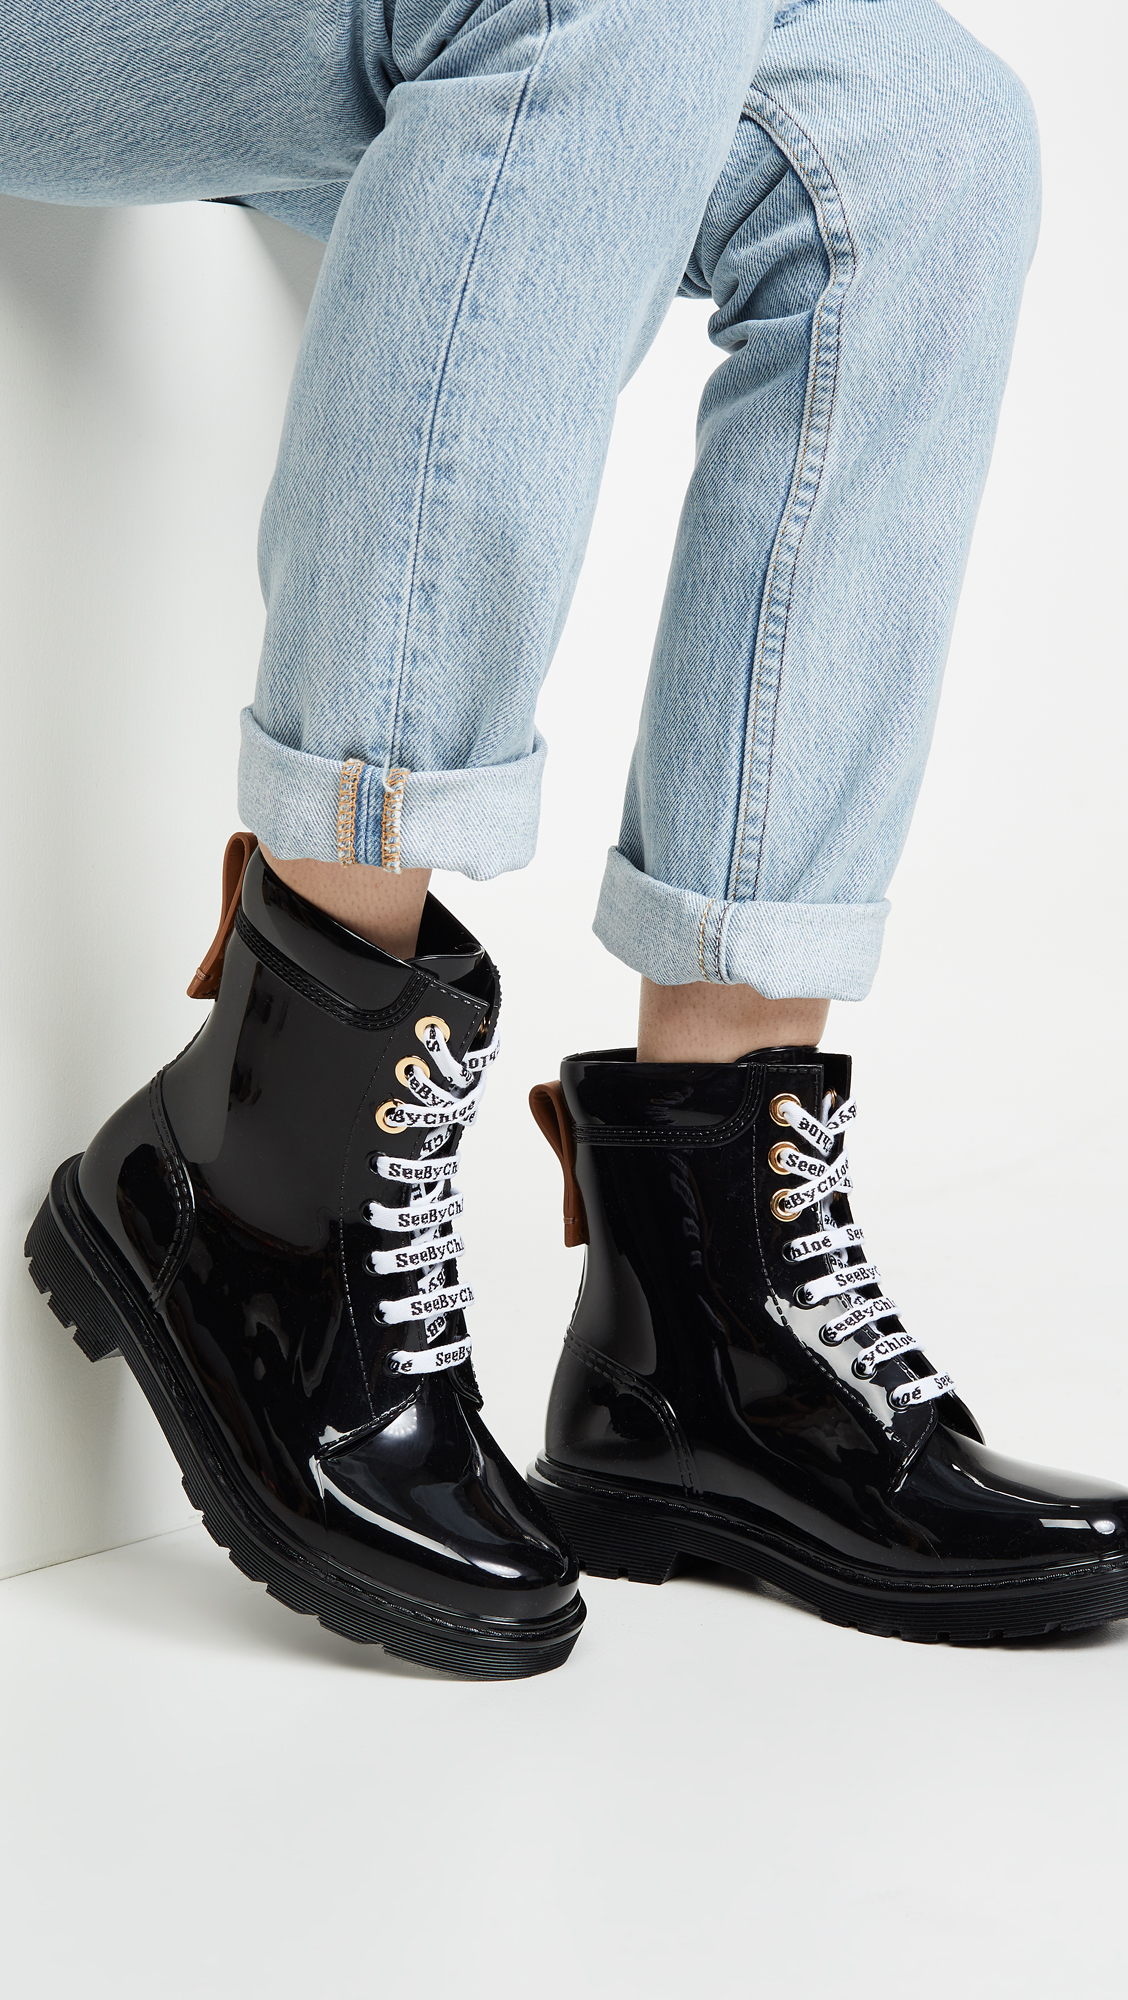 The Top 8 Boot Trends for Fall, According to Stylists - FabFitFun